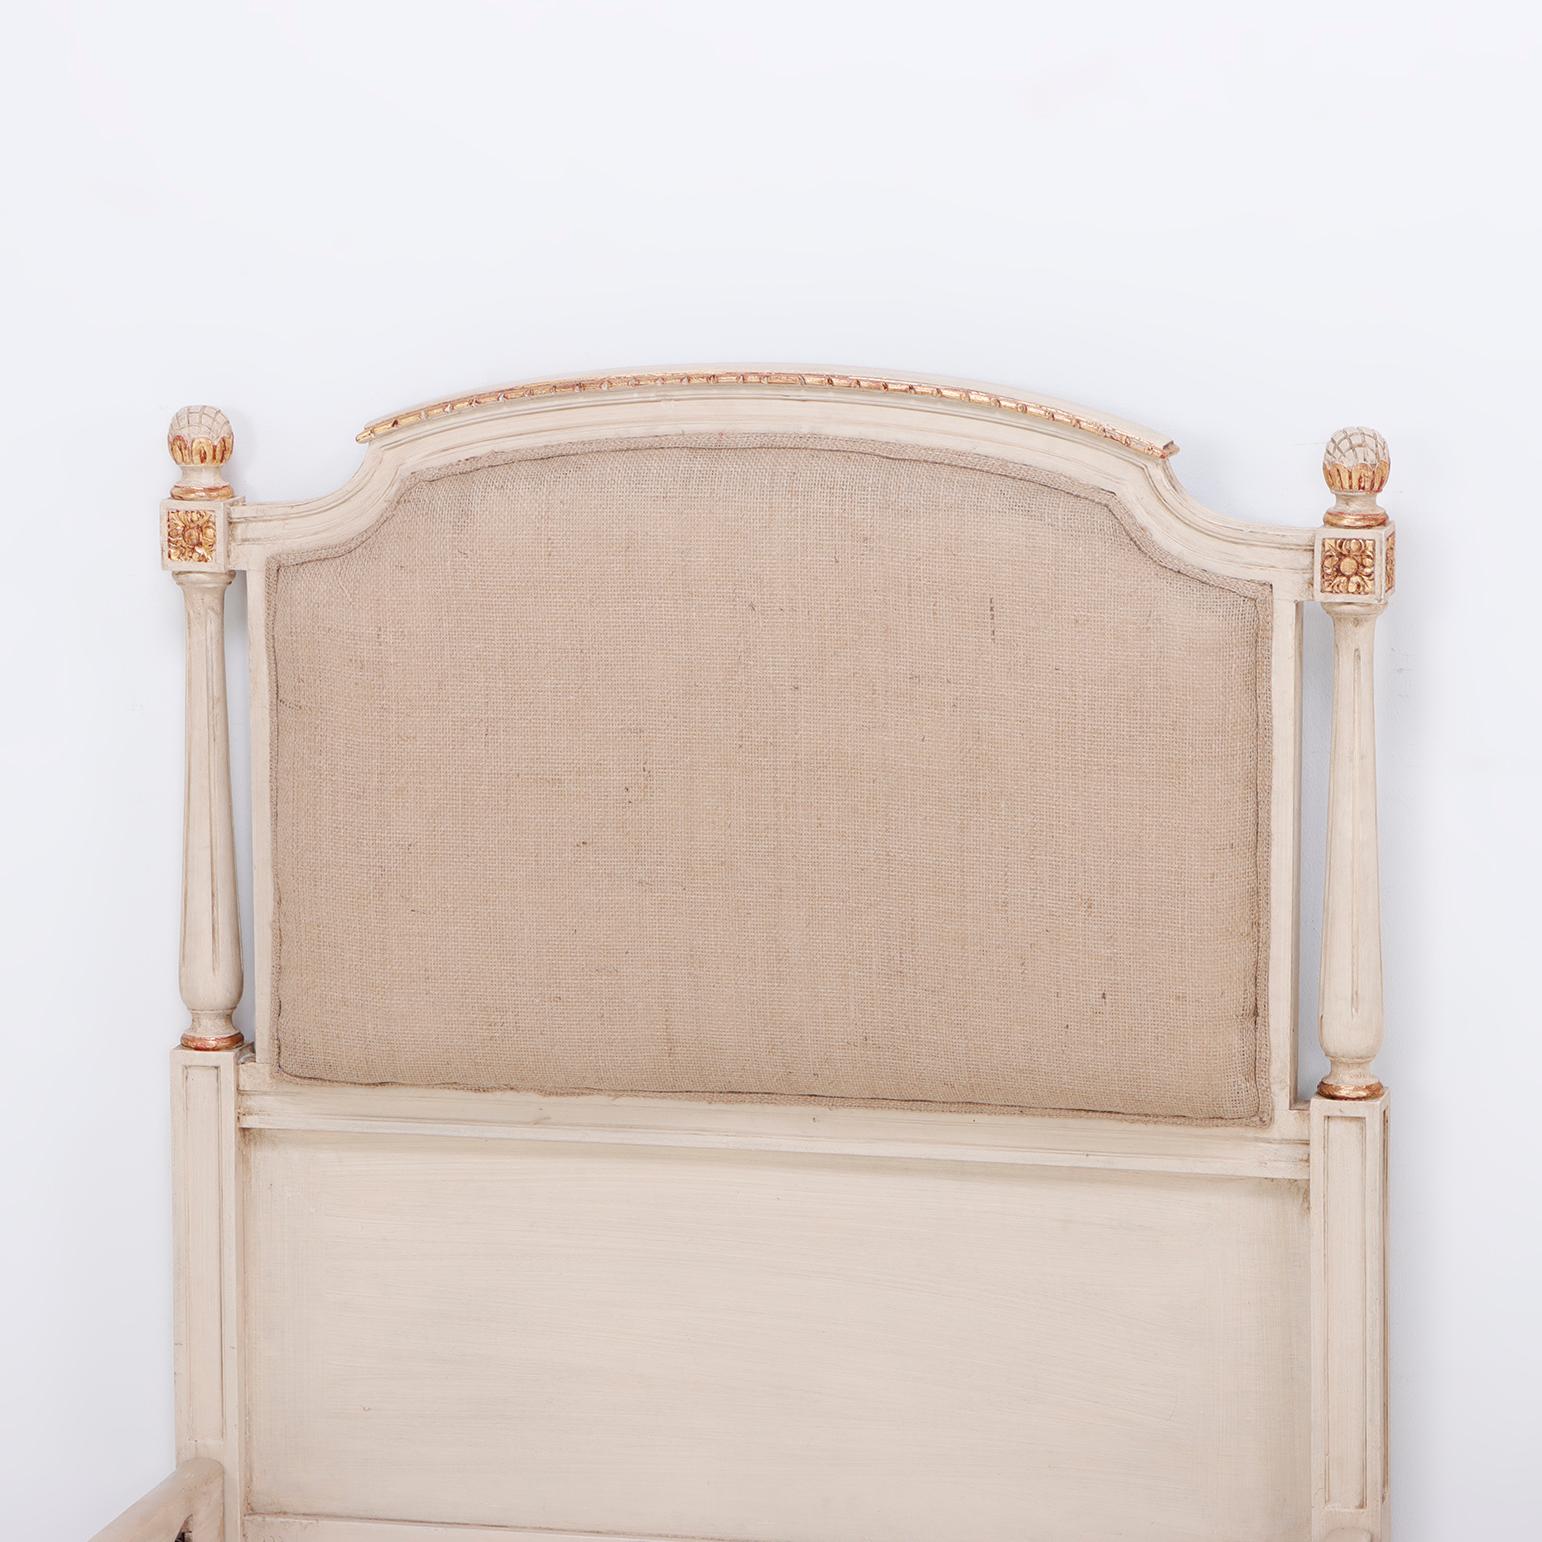 Pair painted and gilt Louis XVI style twin beds C 1940 having been just reupholstered in a burlap like material. They are in excellent condition and ready to be used. interior dimensions are 32